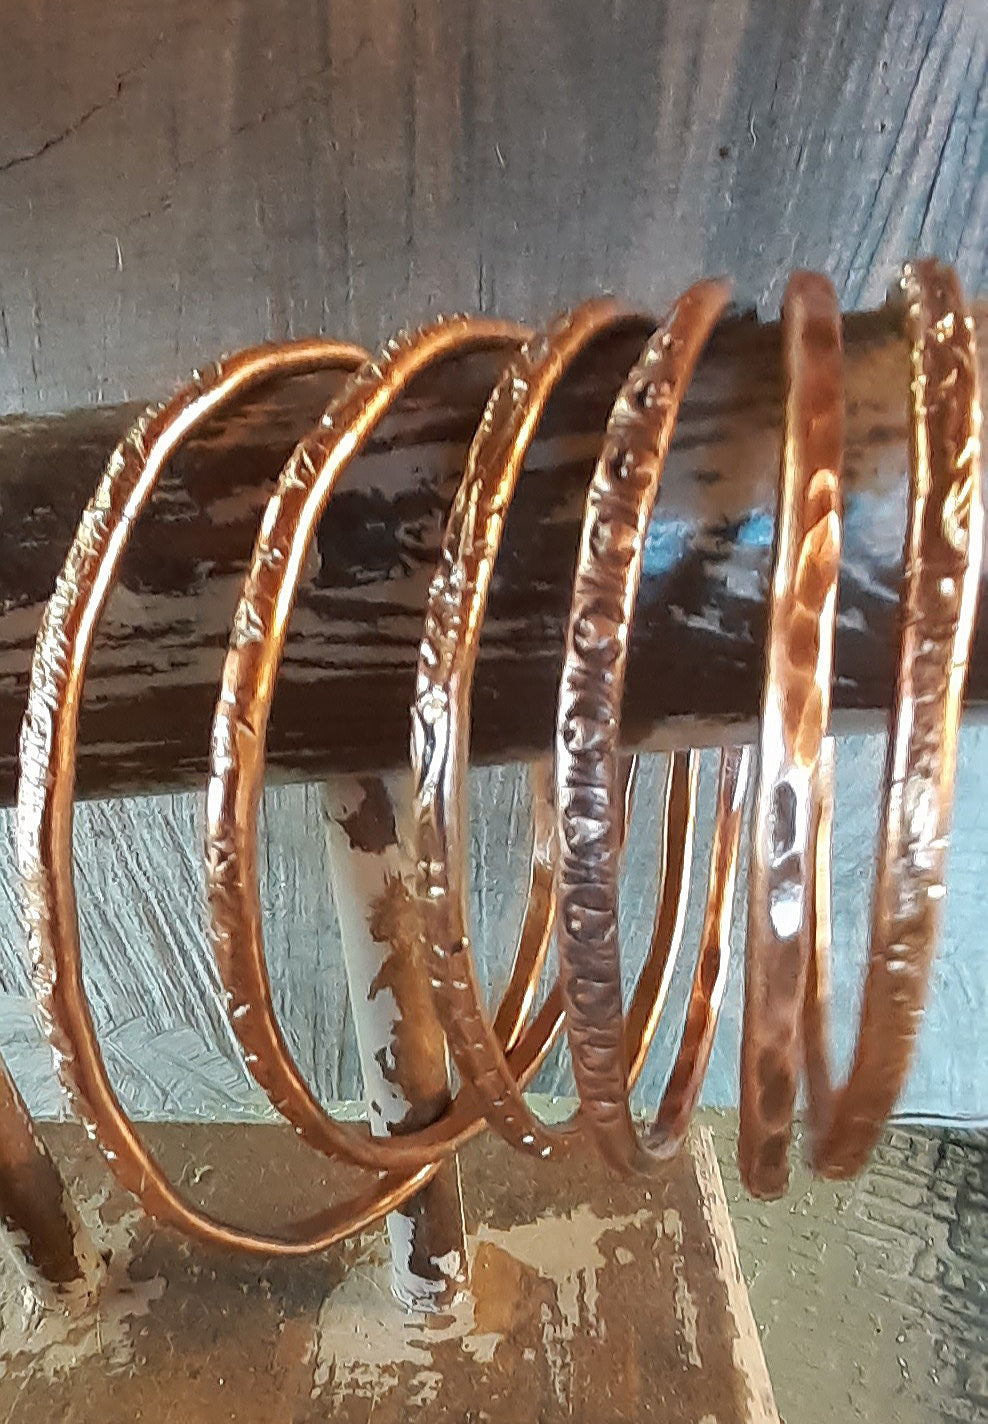 Wholesale Copper Bangle Collection with Display|WRD - WarmRainyDay